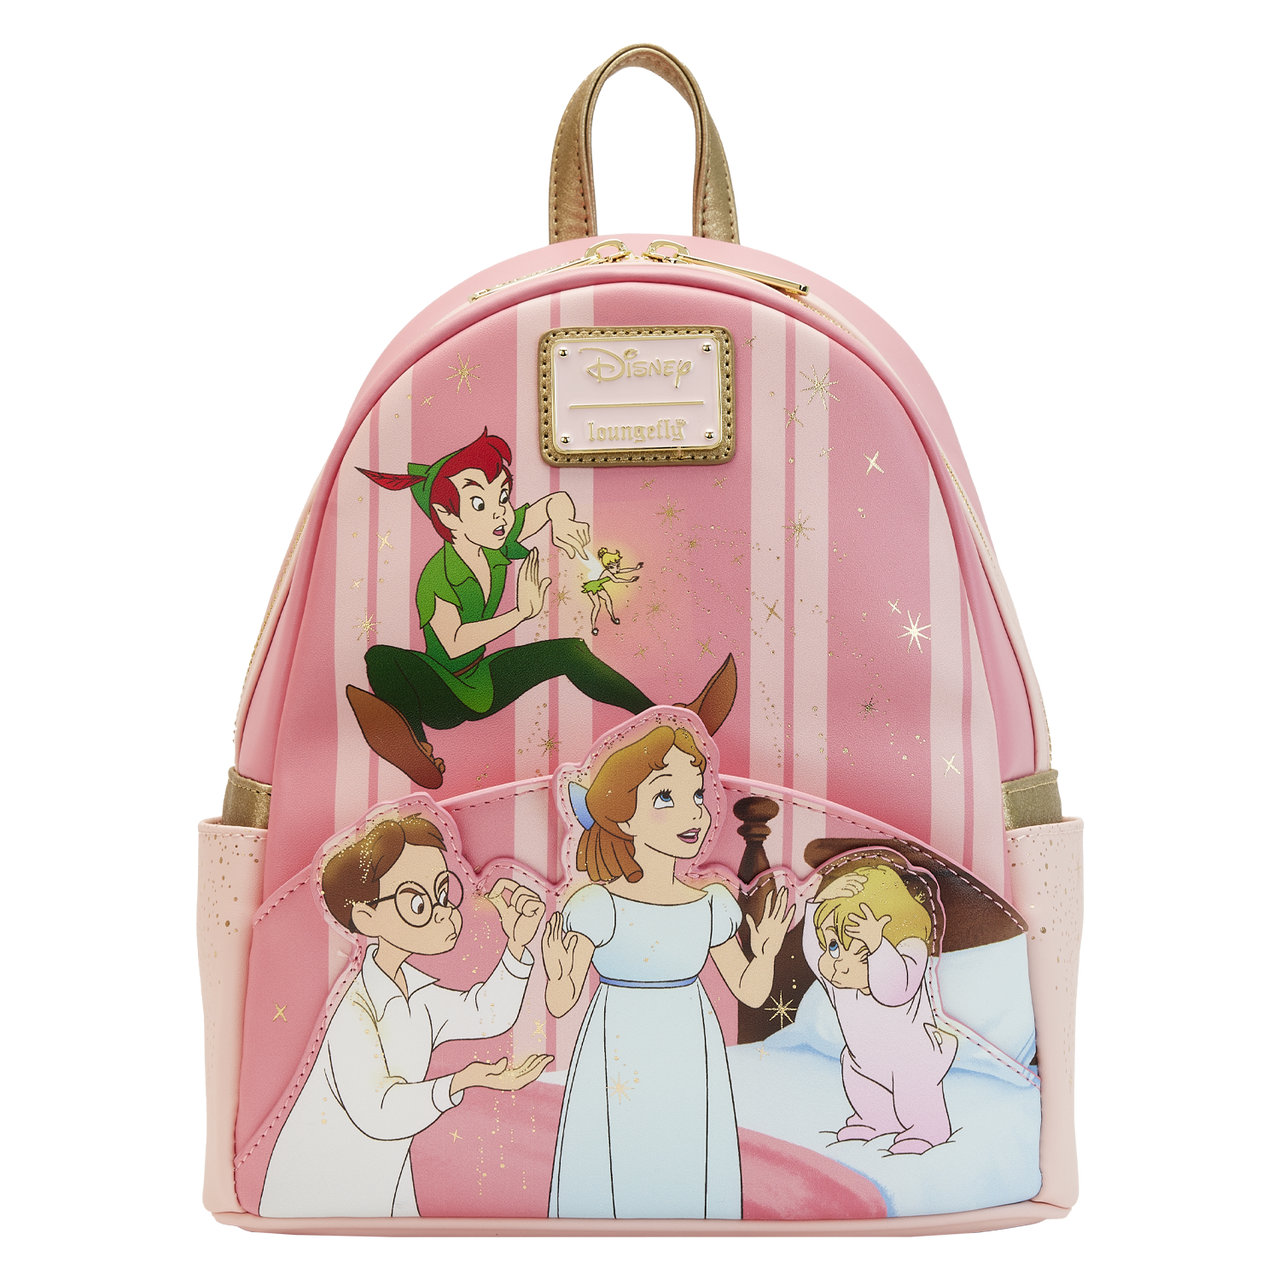 Buy Peter Pan 70th Anniversary You Can Fly Mini Backpack at Loungefly.